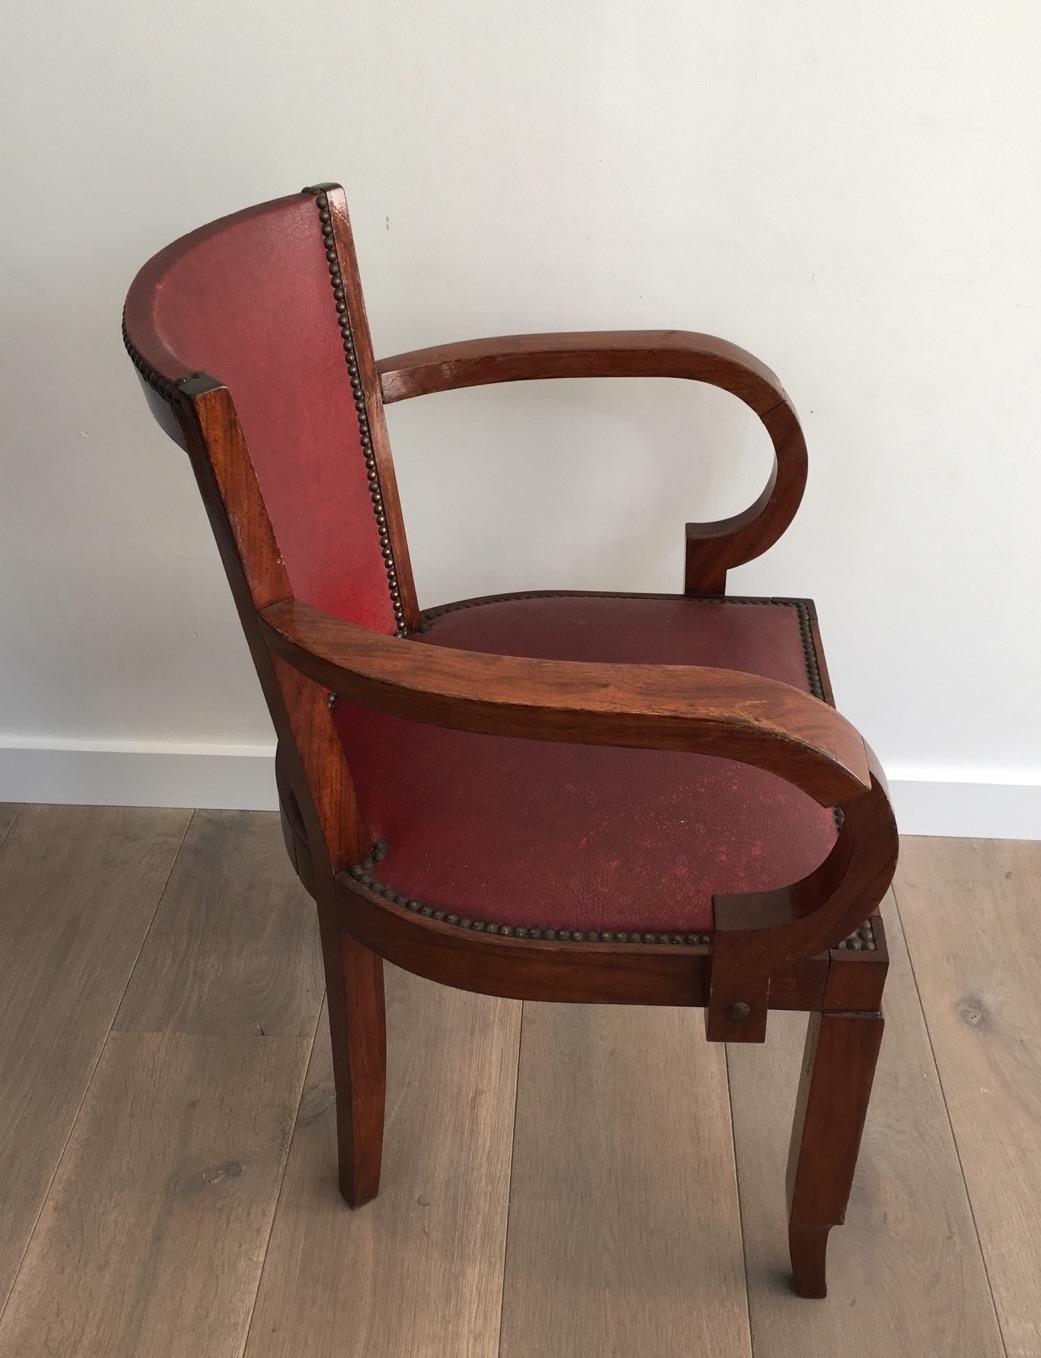 Rare Set of 8 Mahogany and Faux-Leather Art Deco Armchairs, French, circa 1930 For Sale 11